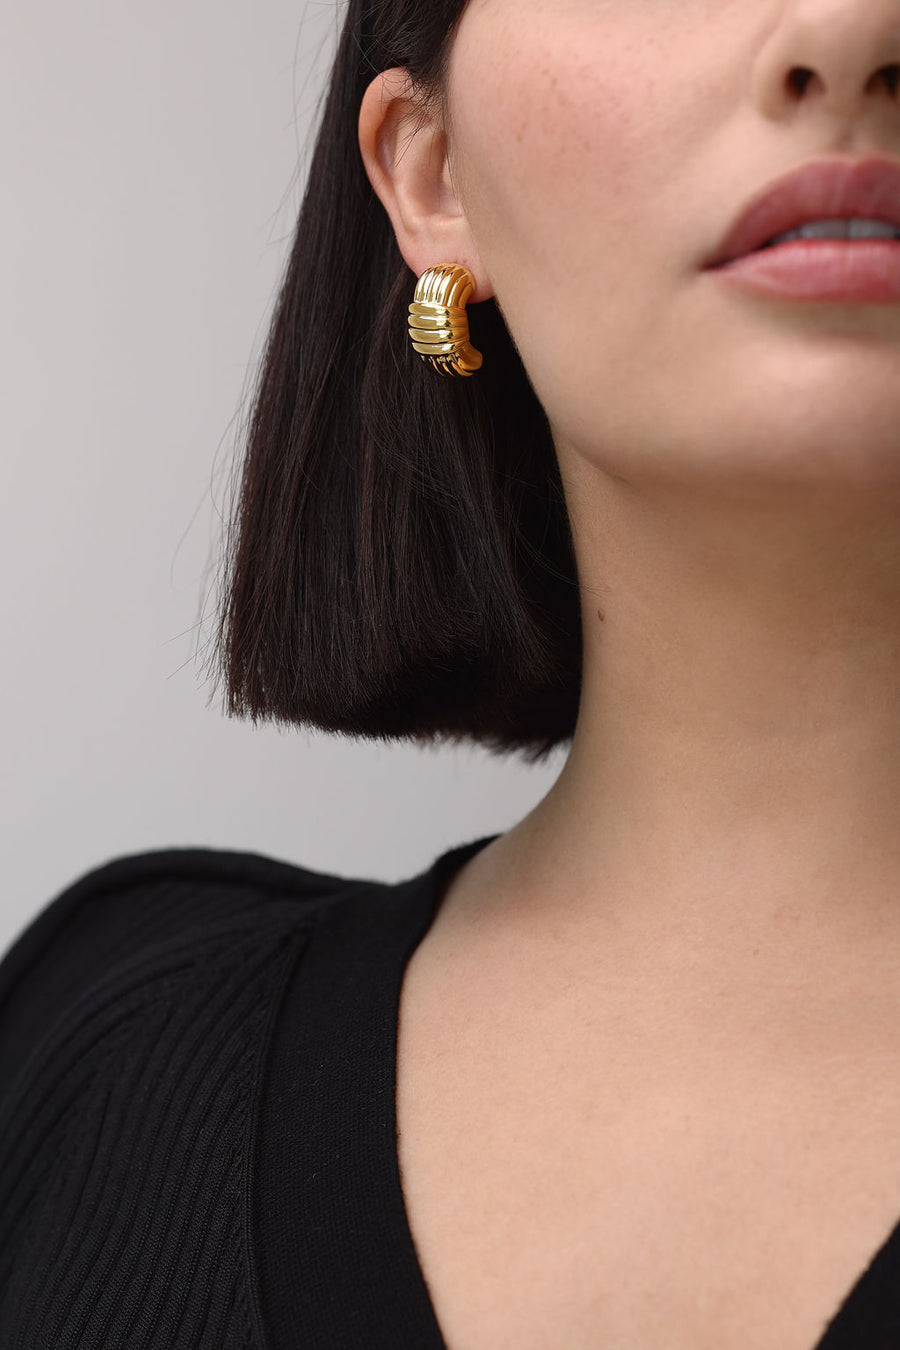 A close of up a chunky gold earring worn by a woman with bob length brown hair